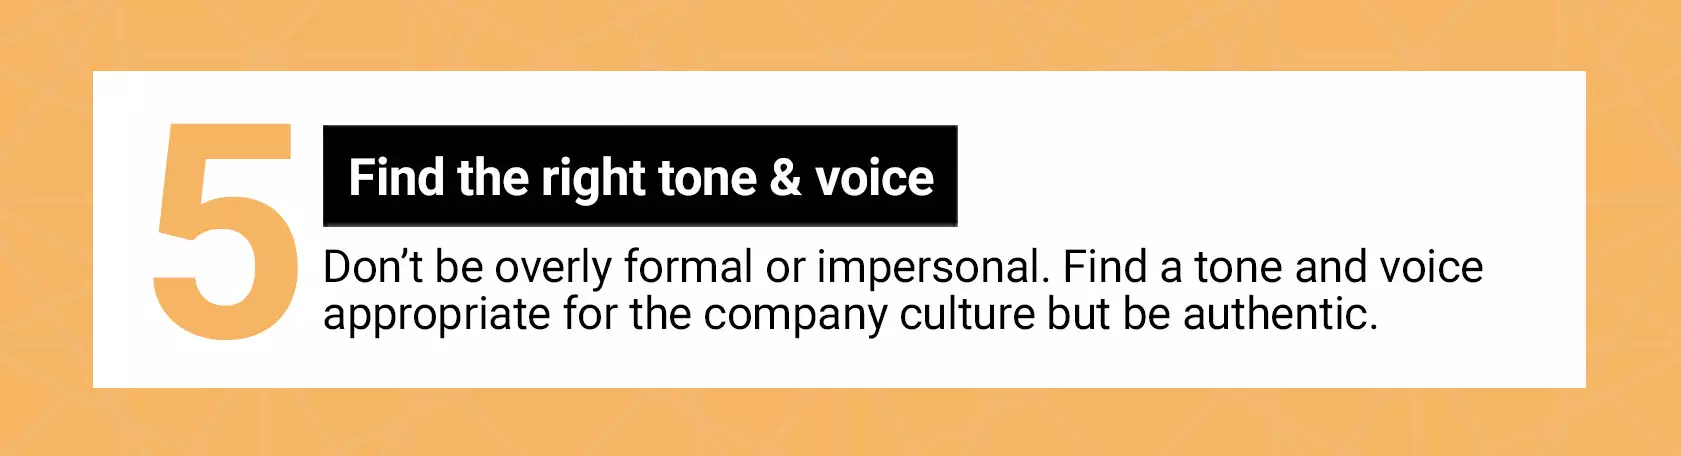 Find the right tone and voice